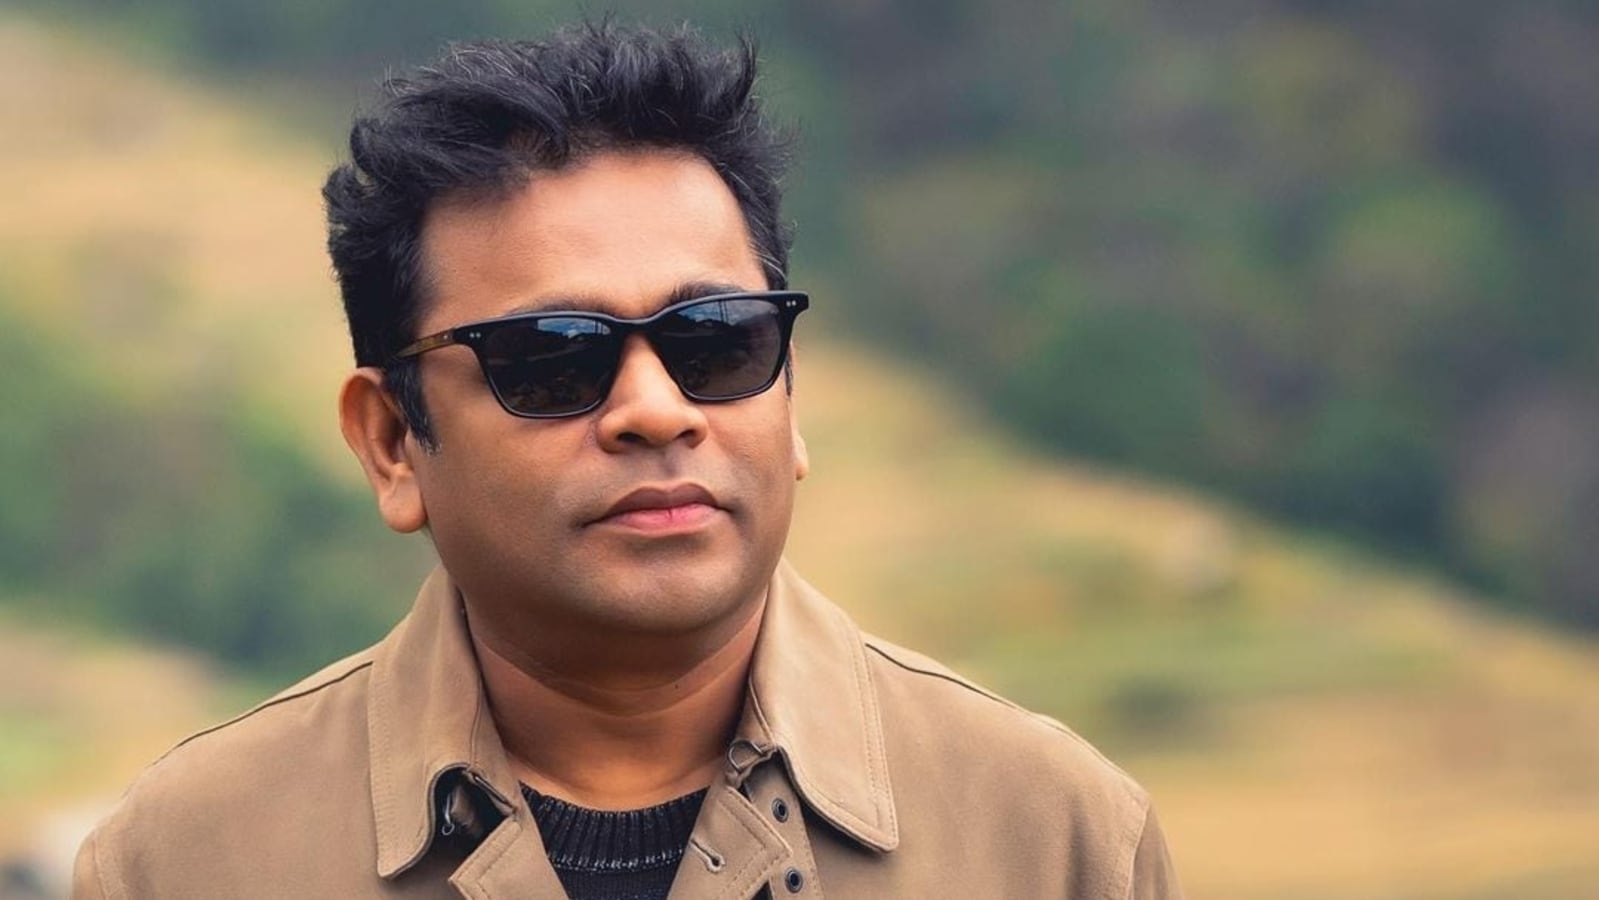 AR Rahman calls remix culture 'distorted, weird': 'Who're you to  re-imagine?' - Hindustan Times